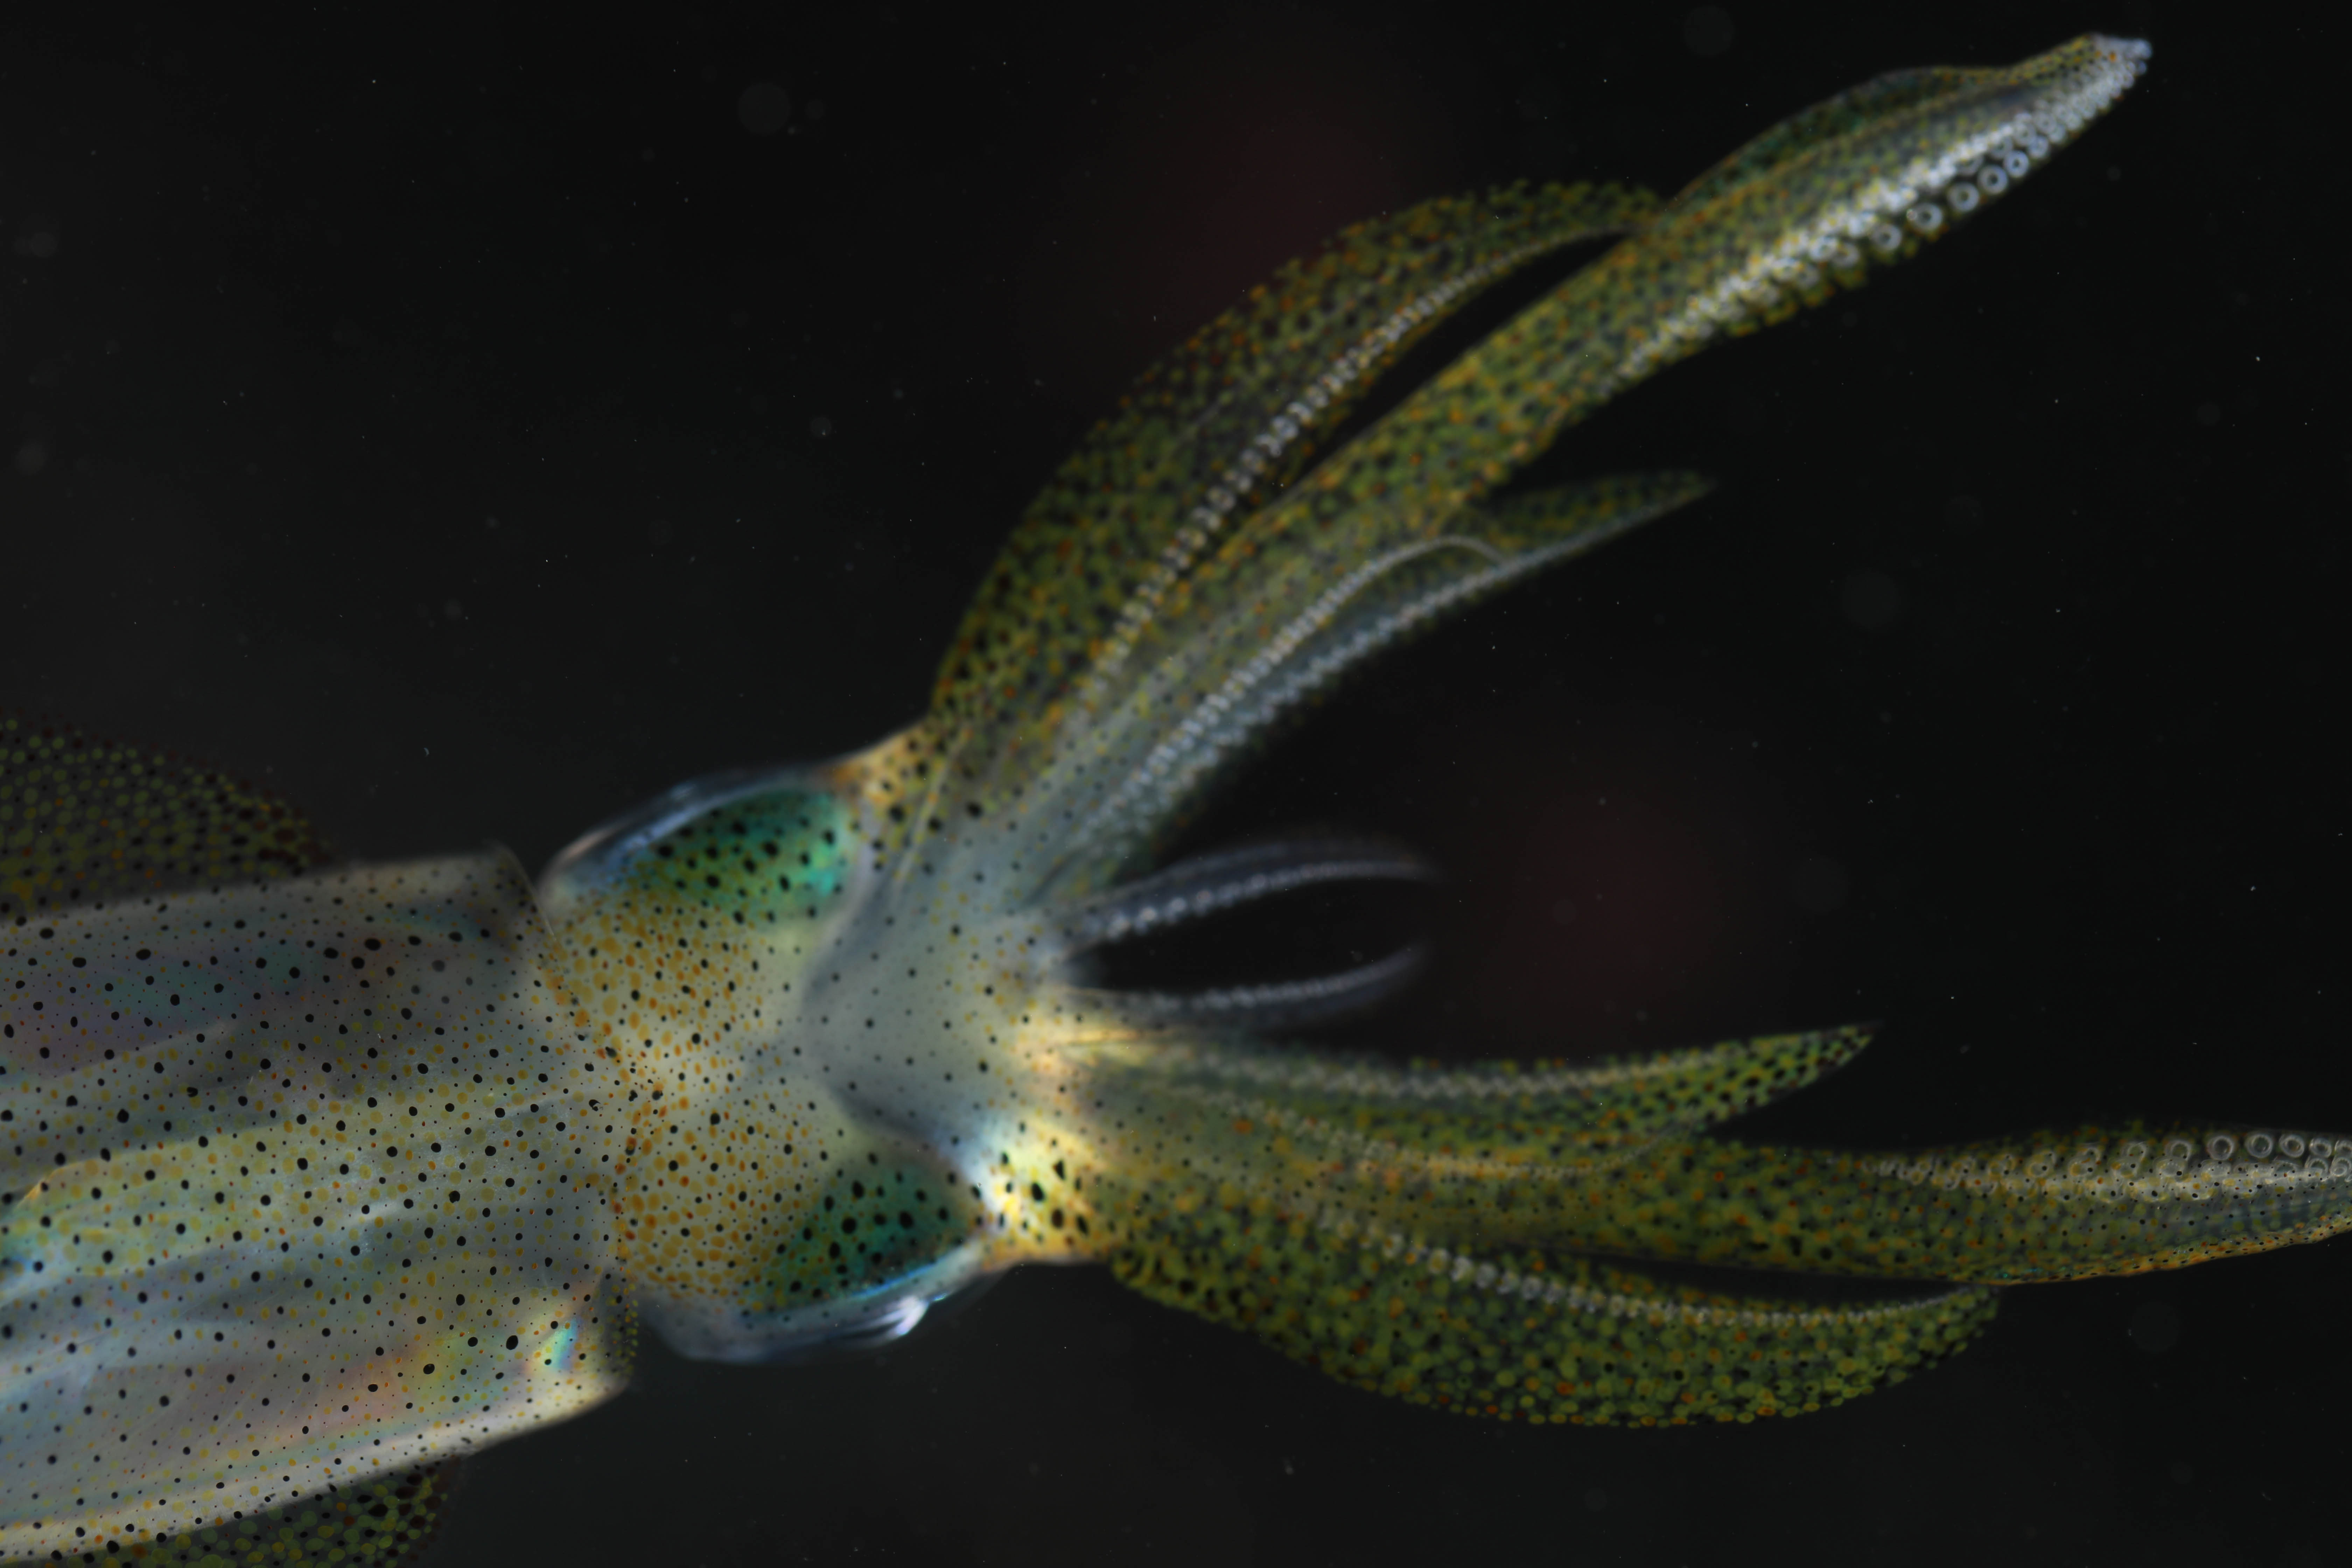 UQ researchers have used modern technology to map the connections of the brain of the reef squid Sepioteuthis lessoniana.